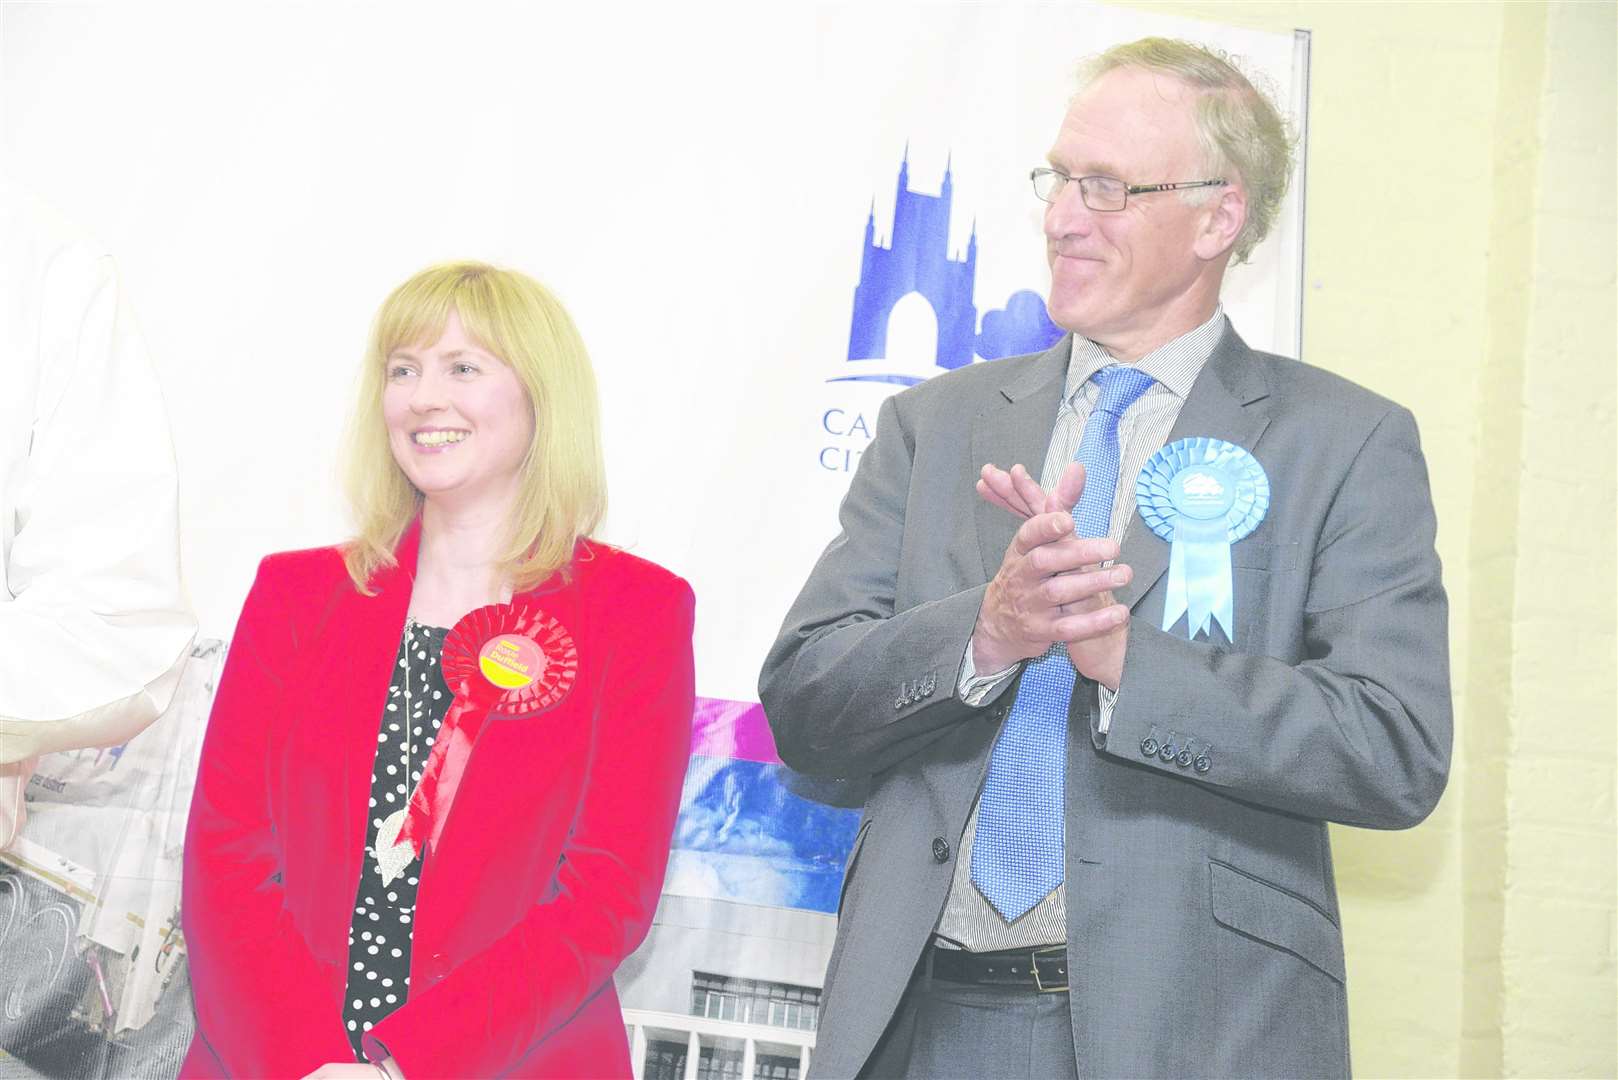 Rosie Duffield ousted long-serving Conservative Sir Julian Brazier from the Canterbury seat in 2017